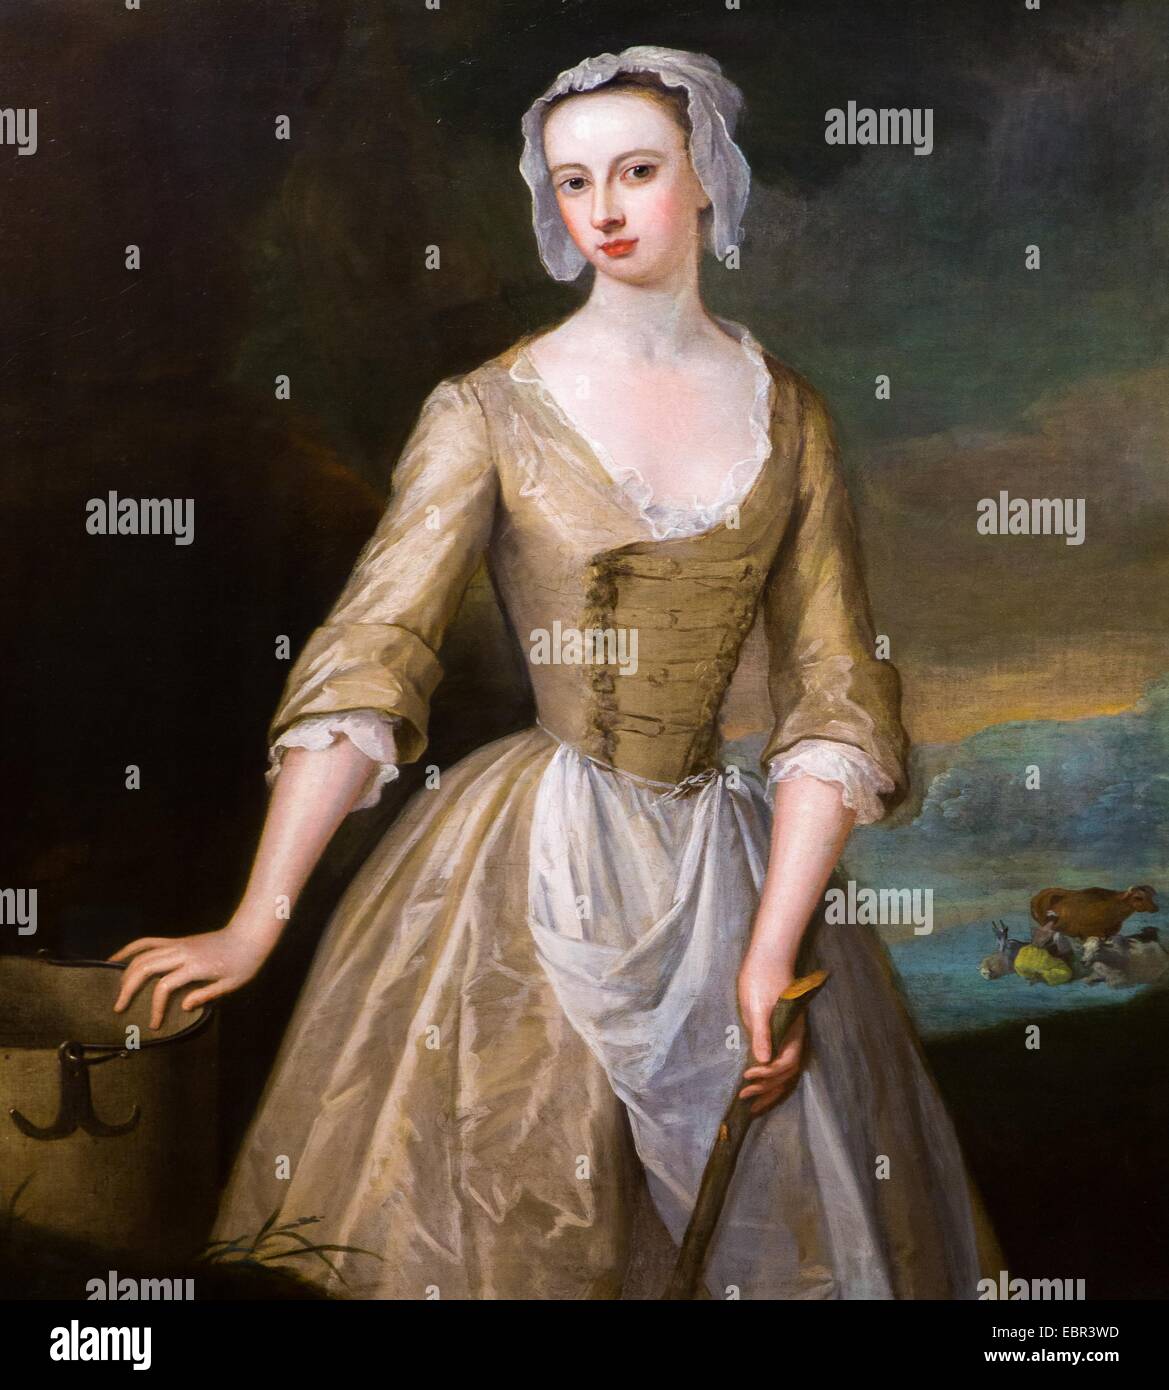 ActiveMuseum 0003720.jpg / Catherine Douglas (born Hyde) Duchess of Queensberry, around 1730 - Charles Jervas Oil on Canvas 22/01/2014  -   / 18th century Collection / Active Museum Stock Photo